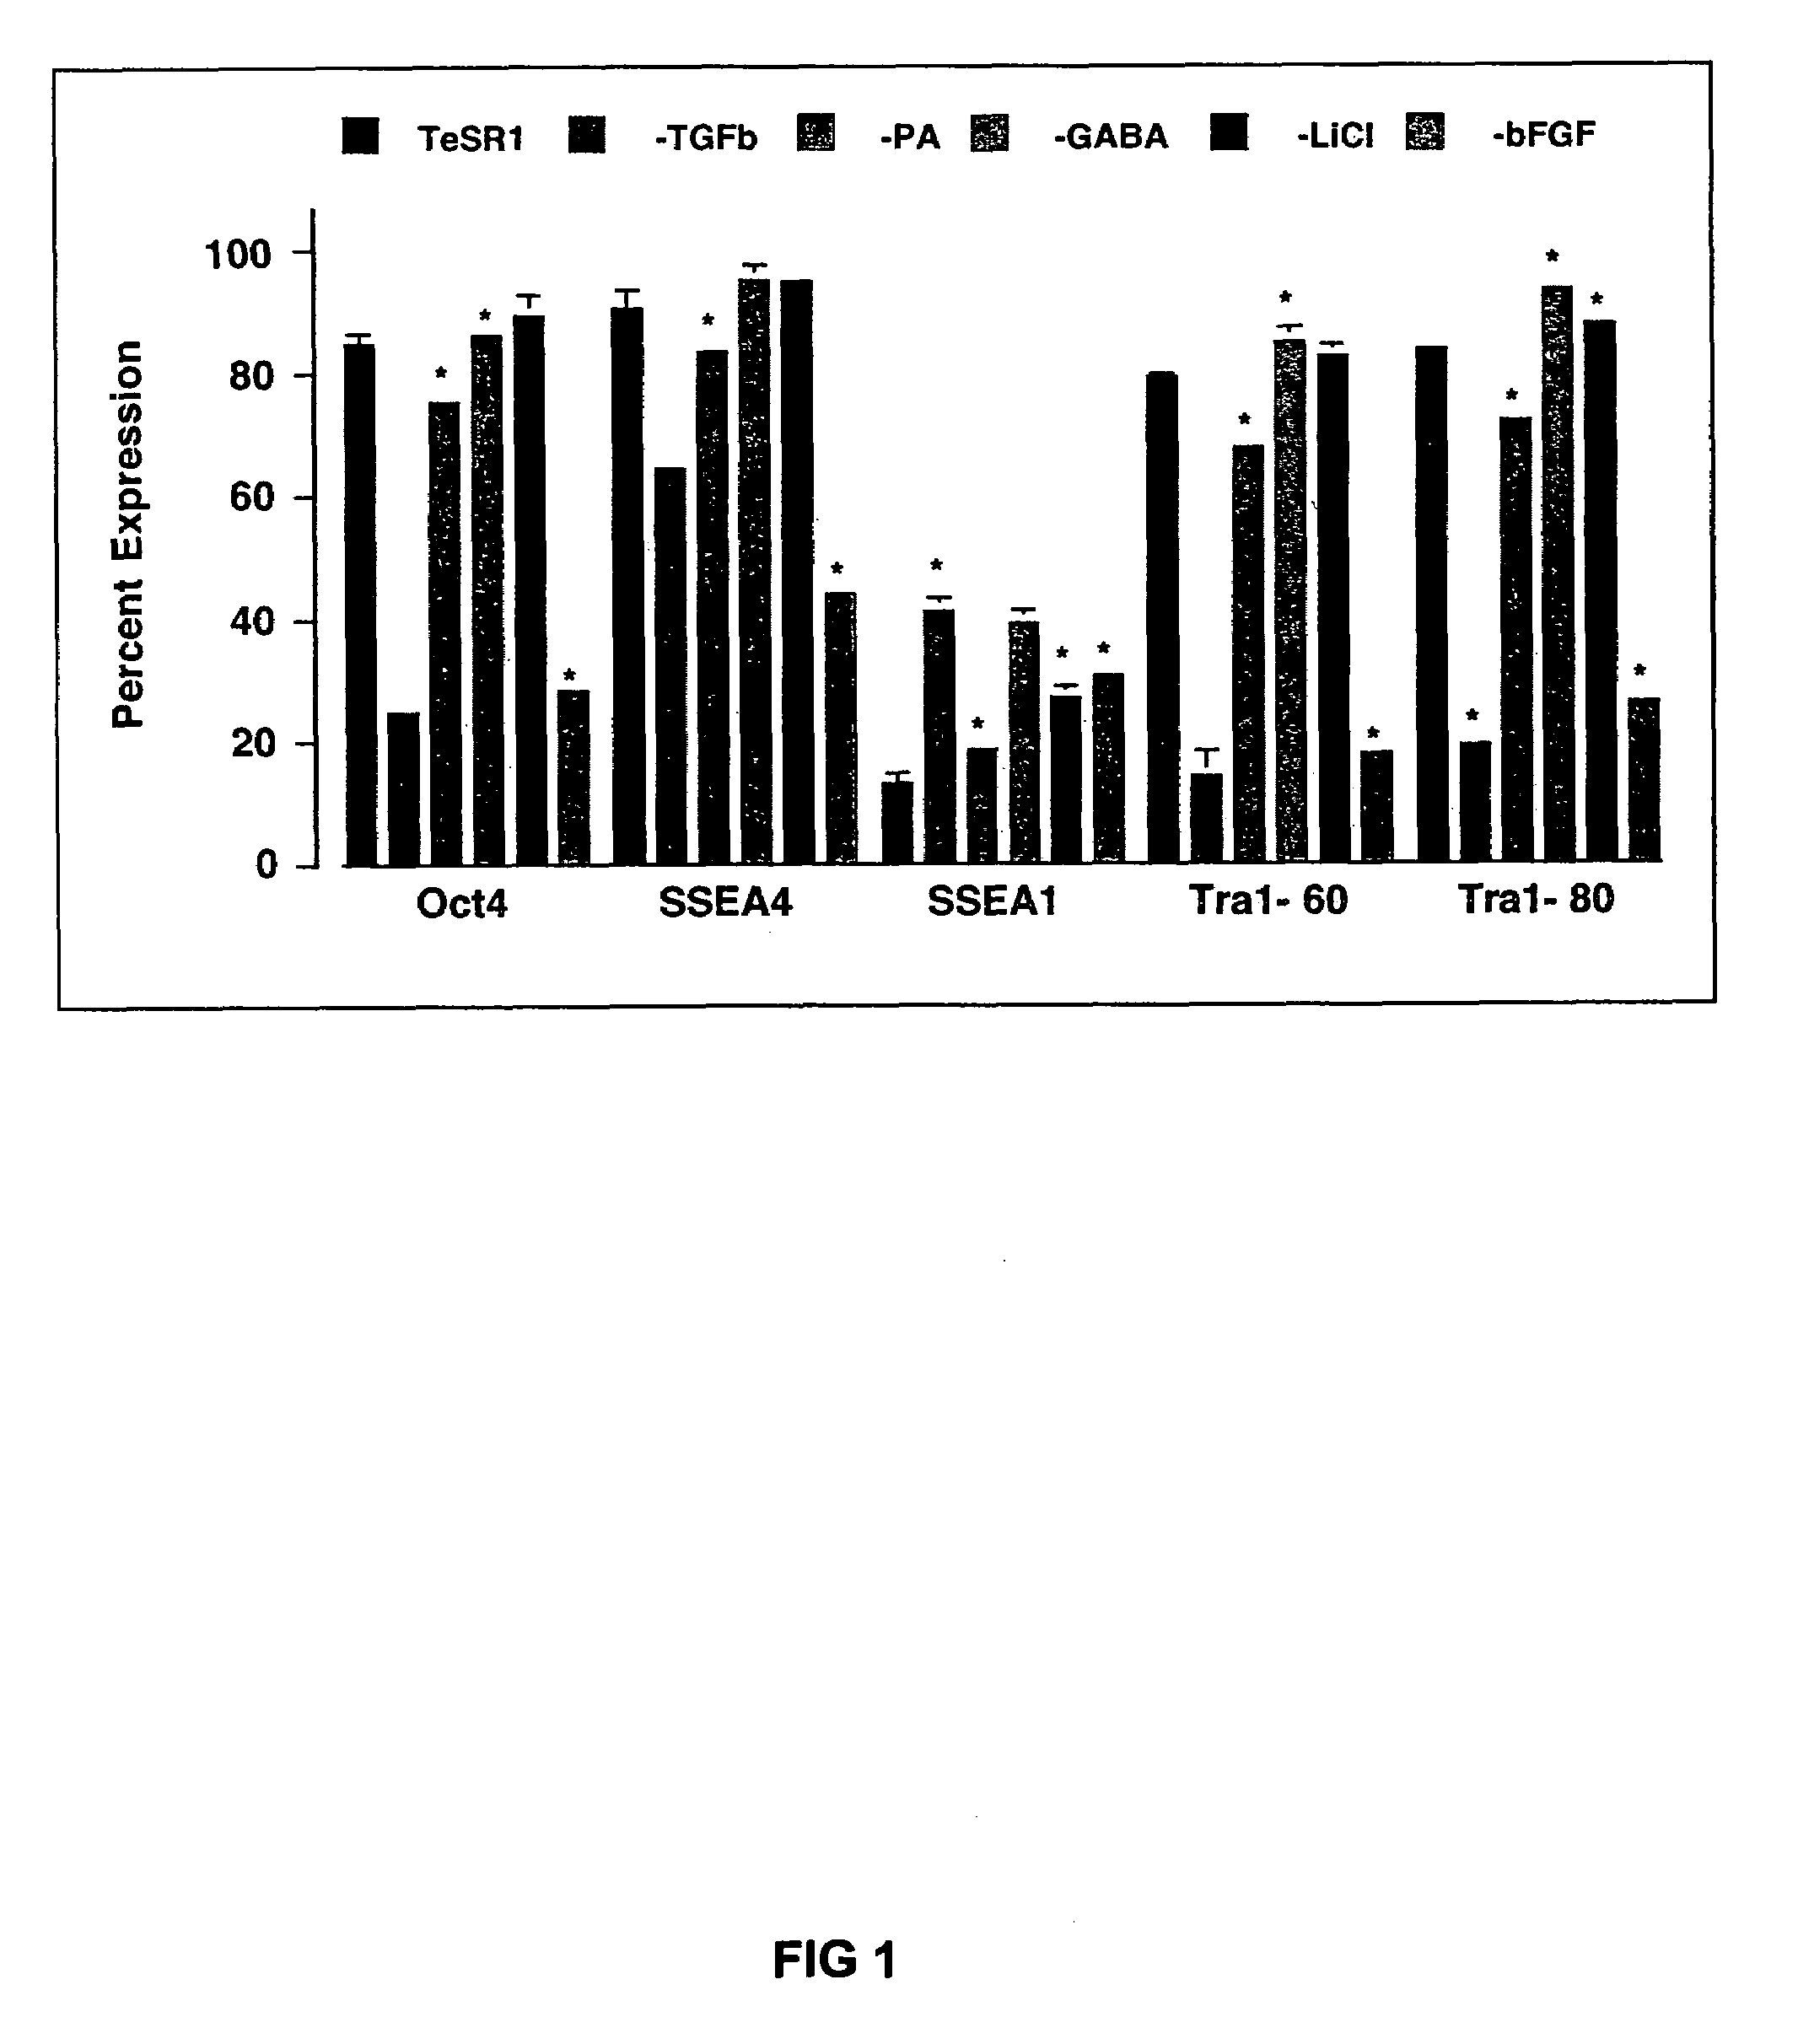 Medium containing pipecholic acid and gamma amino butyric acid and culture of embryonic stem cells